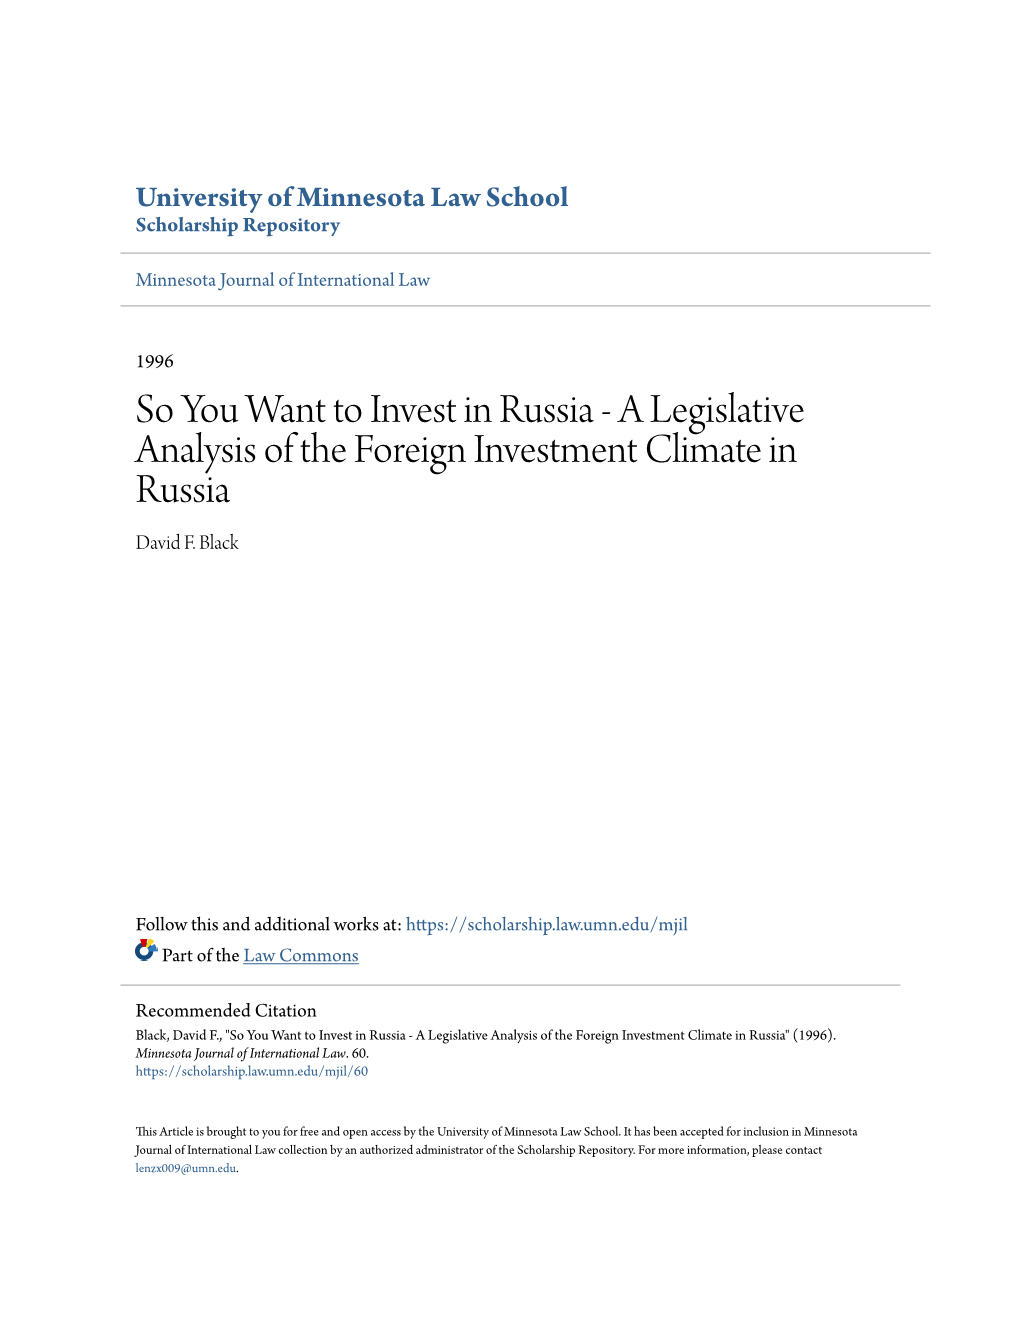 A Legislative Analysis of the Foreign Investment Climate in Russia David F